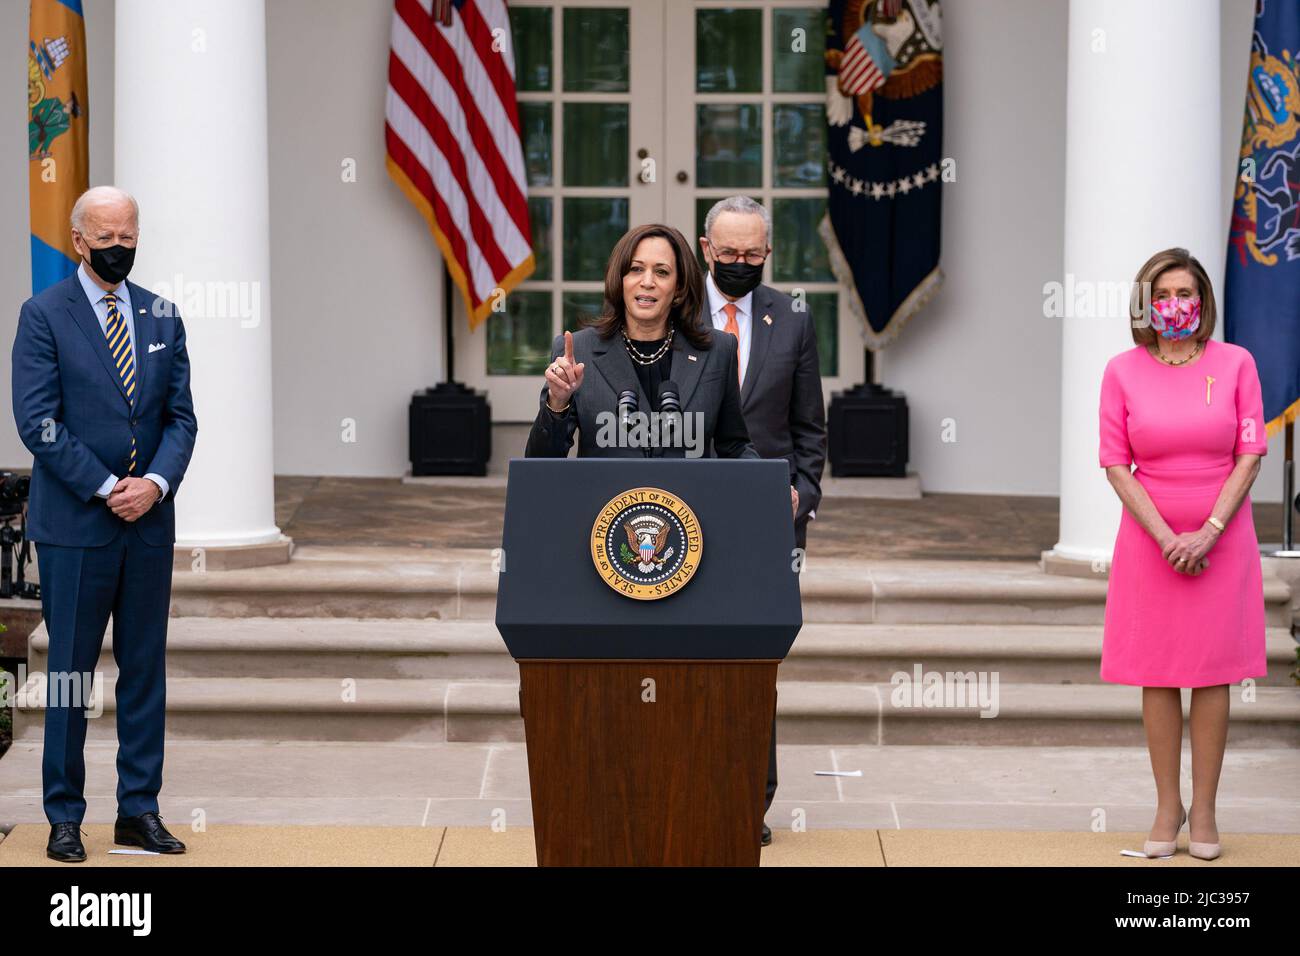 President Joe Biden, Senate Majority Leader Charles “Chuck” Schumer, D-N.Y., and House Speaker Nancy Pelosi, D-Calif., look on as Vice President Kamala Harris delivers remarks on the American Rescue Plan Friday, March 12, 2021, in the Rose Garden of the White House. Stock Photo